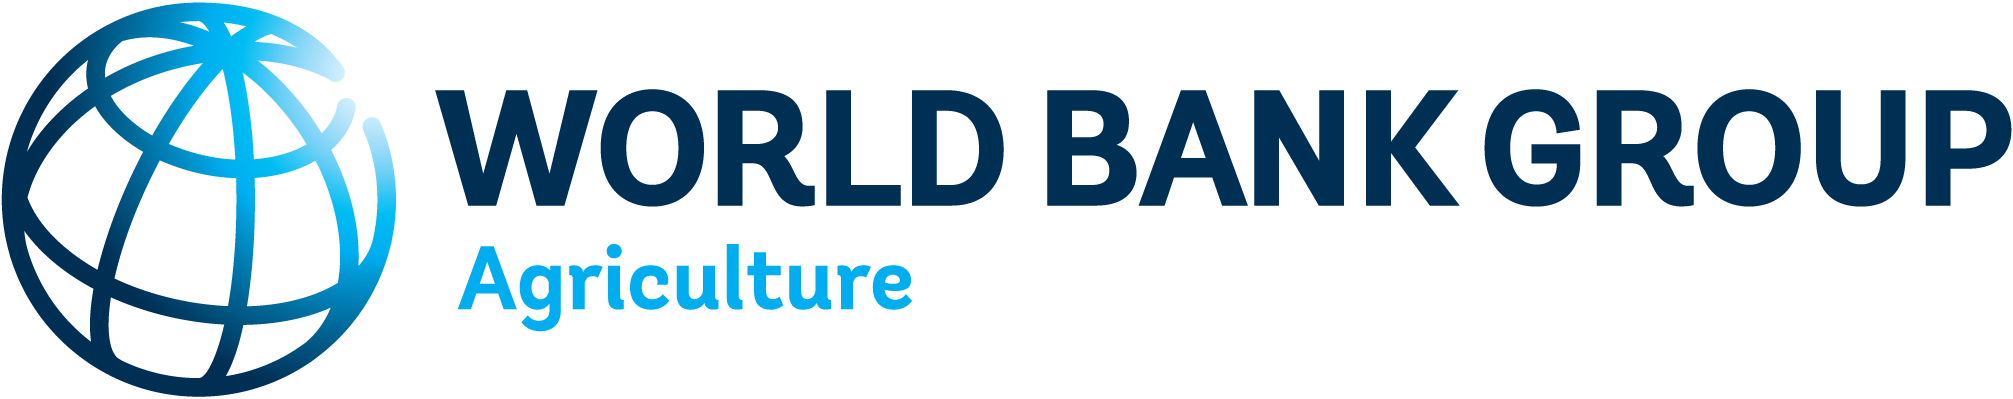 World Bank Group - Agriculture